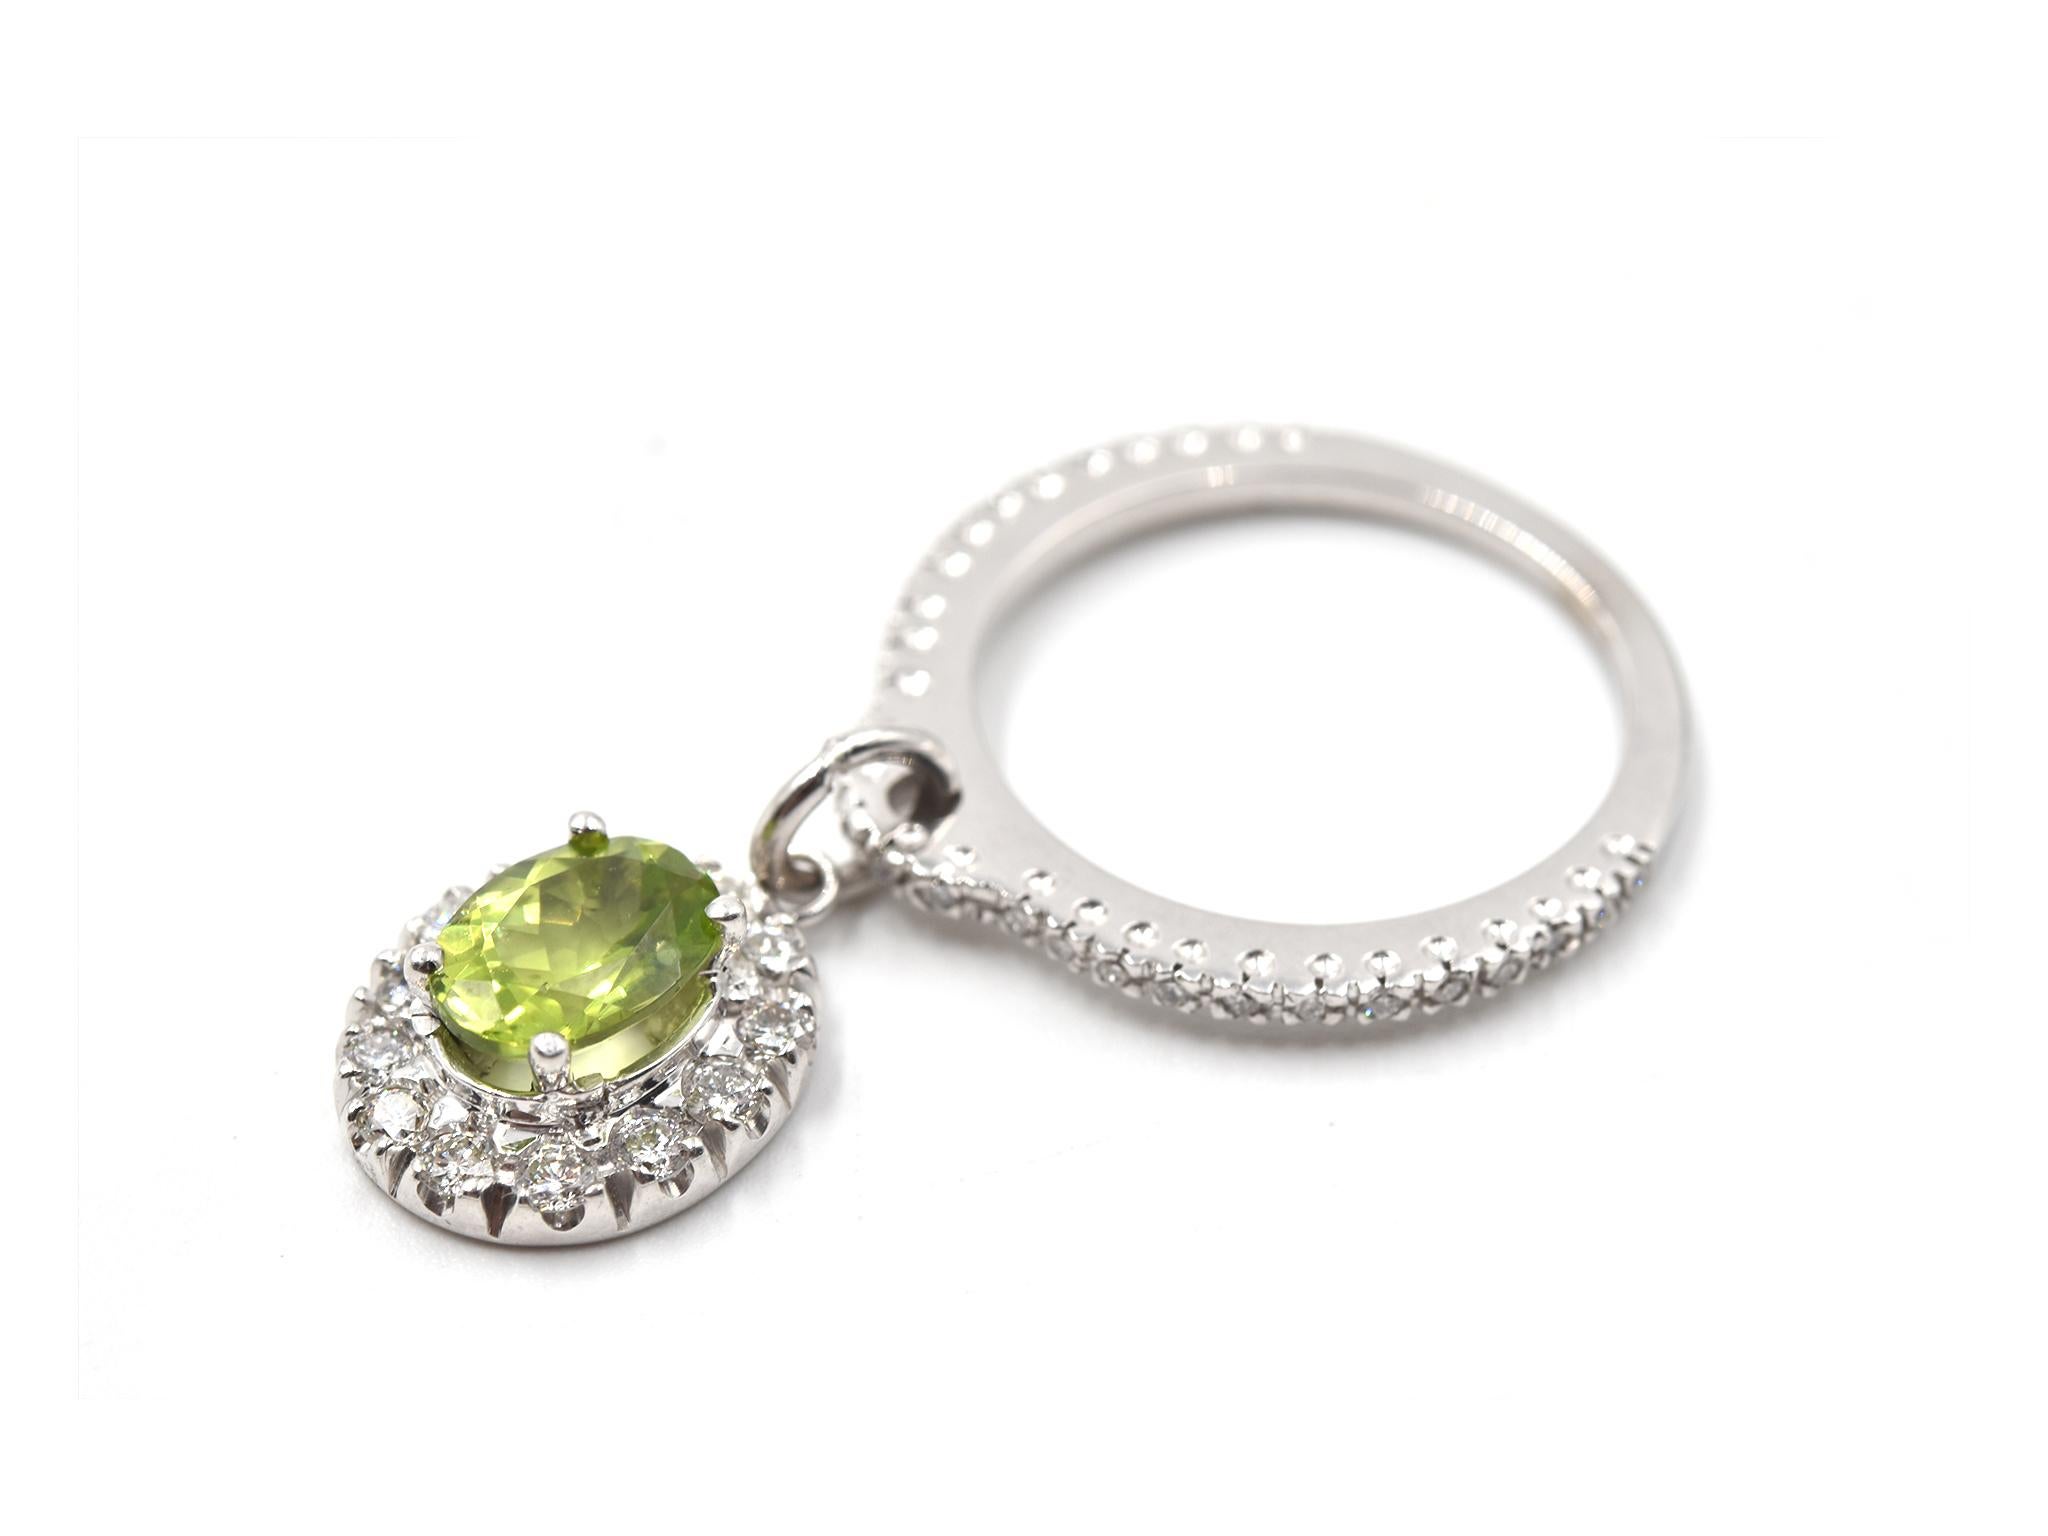 Designer: custom design
Material: 14k white gold
Peridot: 1 oval cut = 1.39ct, prong set in halo
Diamonds: 42 round brilliant cut = 0.50cttw
Color: G
Clarity: VS
Ring Size: 7 ¼ (please allow two additional shipping days for sizing